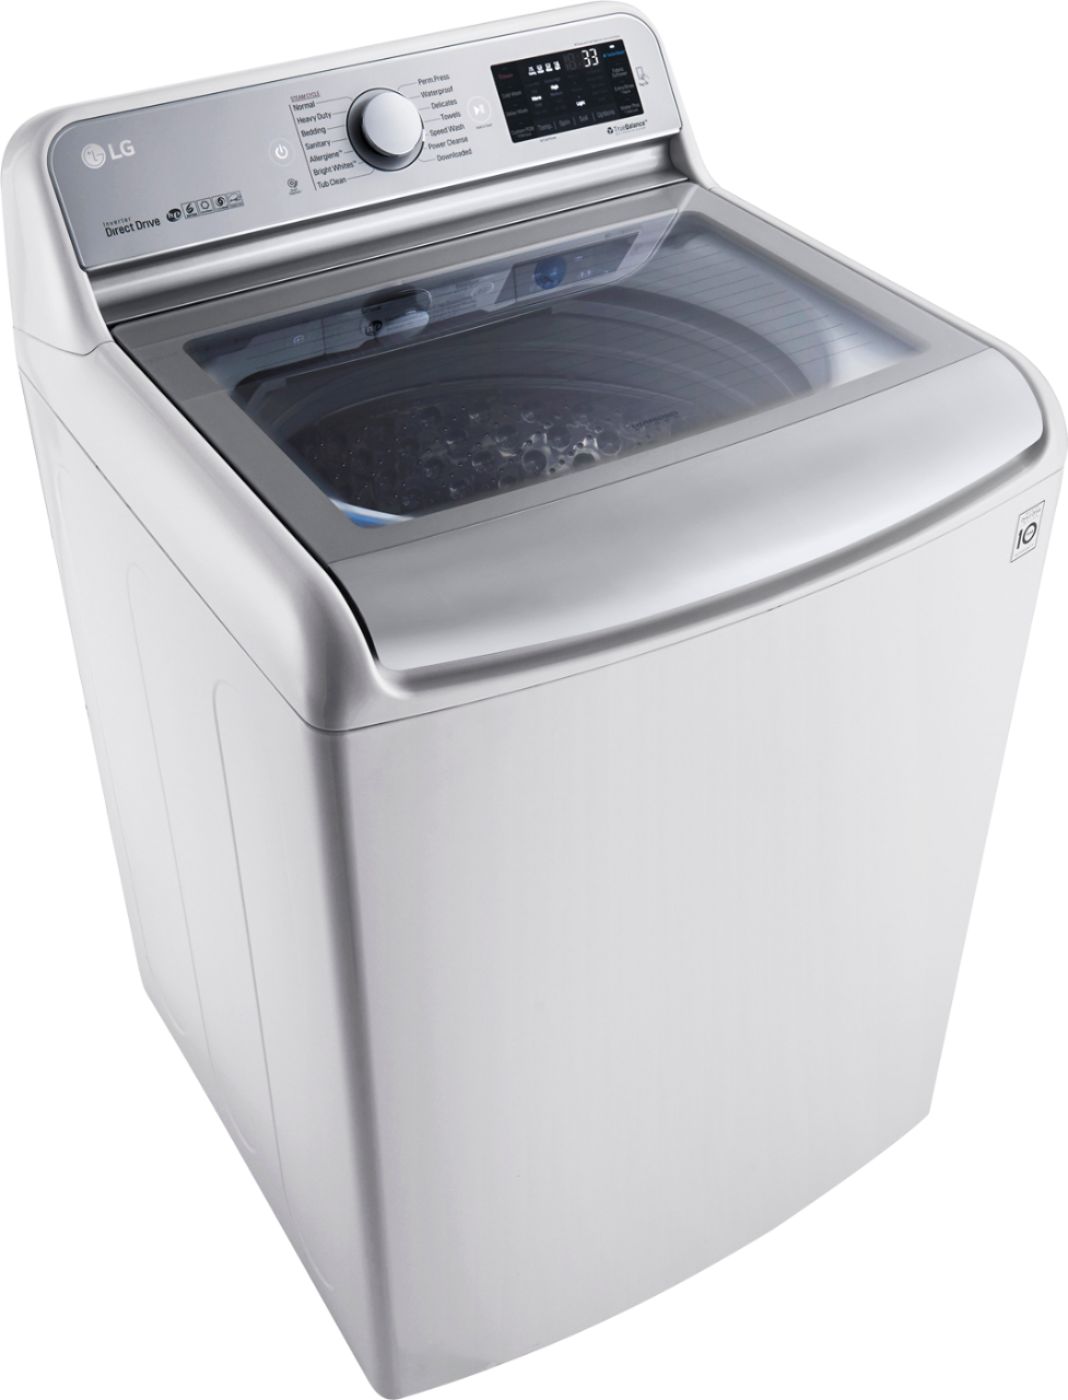 Angle View: LG - 5.7 Cu. Ft. High-Efficiency Top-Load Washer with Steam and TurboWash Technology - White